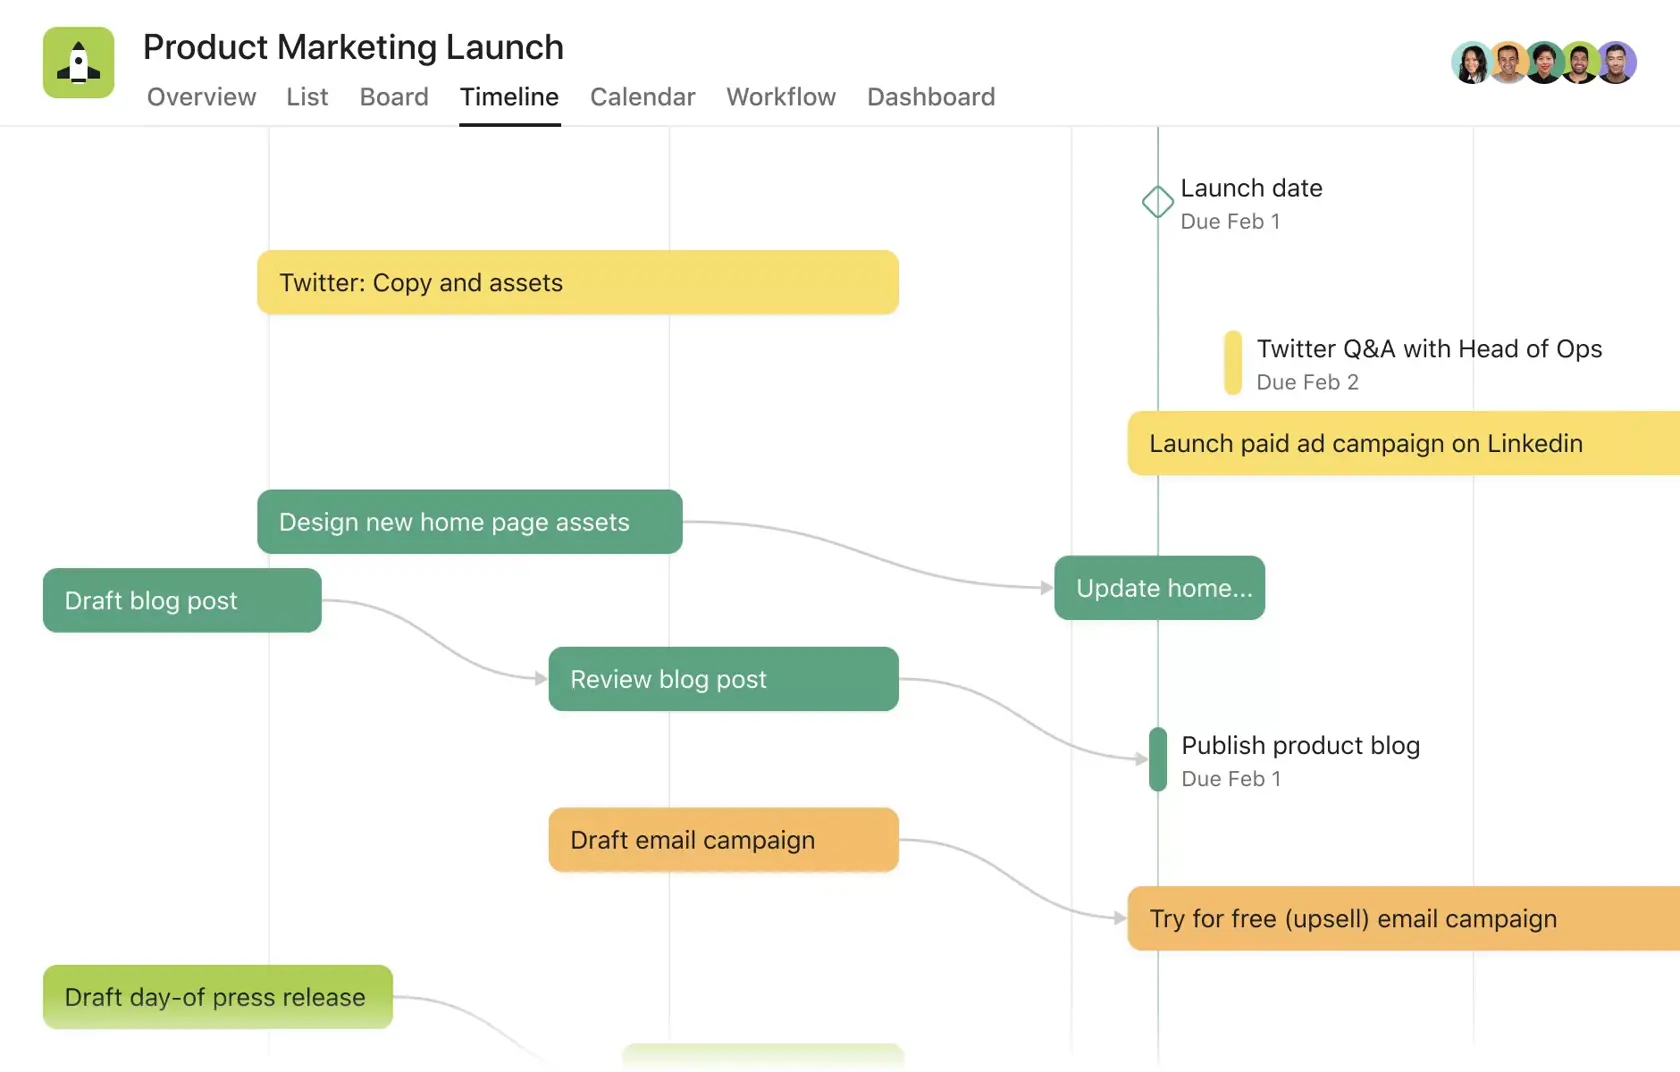 [Product UI] Product marketing launch project in Asana (timeline view)